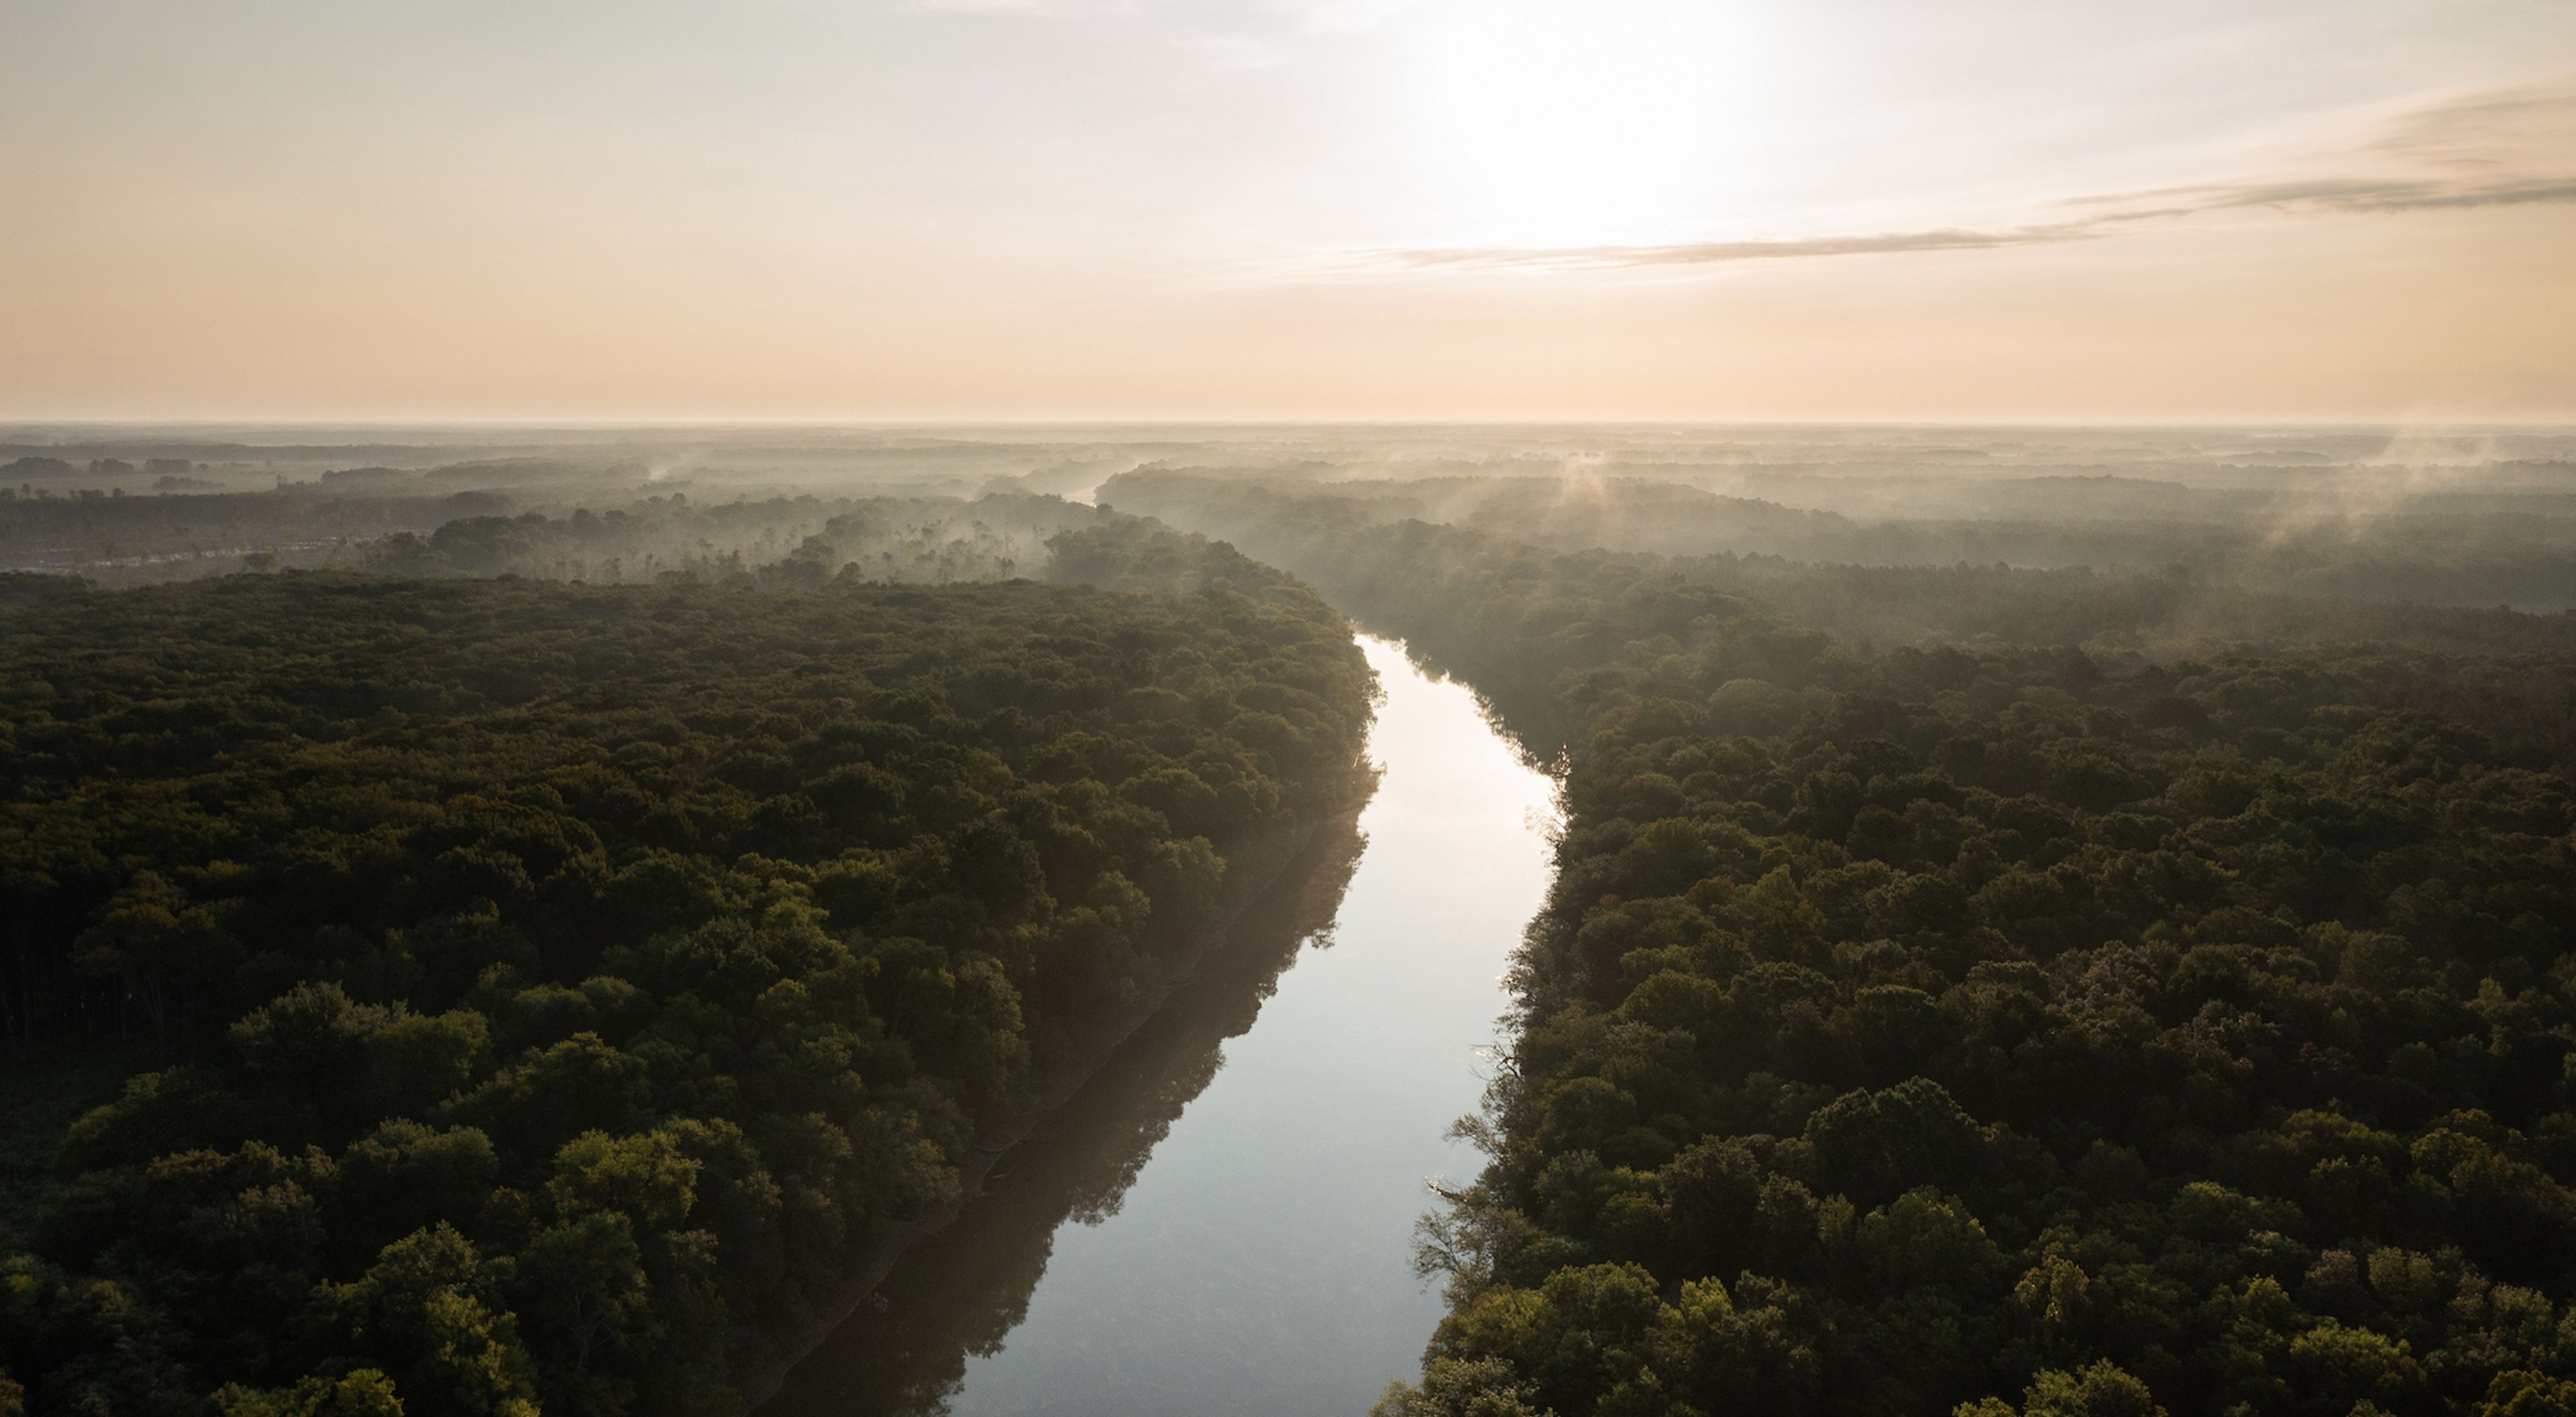 Aerial view of a river flowing through a forest while mist rises off the trees under a hazy orange sky.